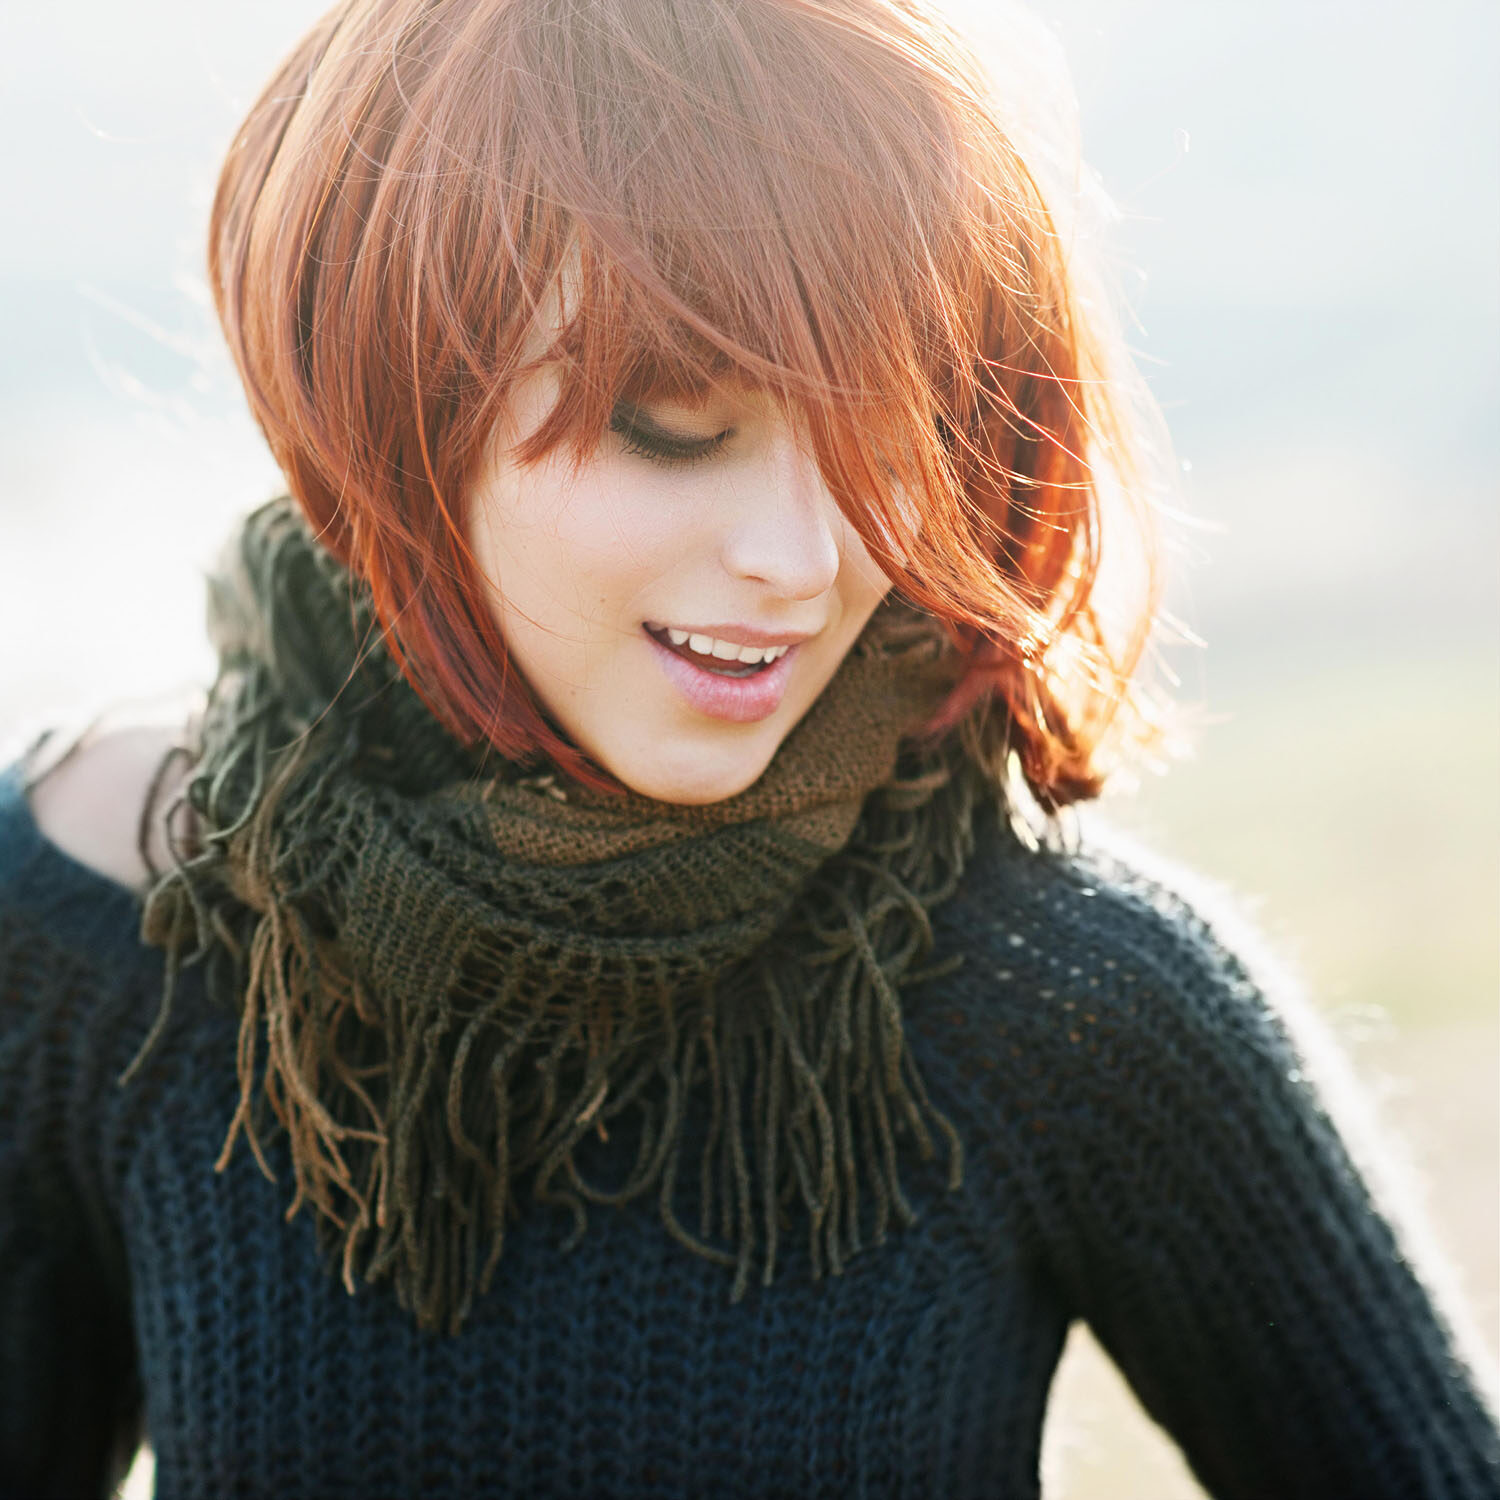 A woman with red hair and wearing a scarf.